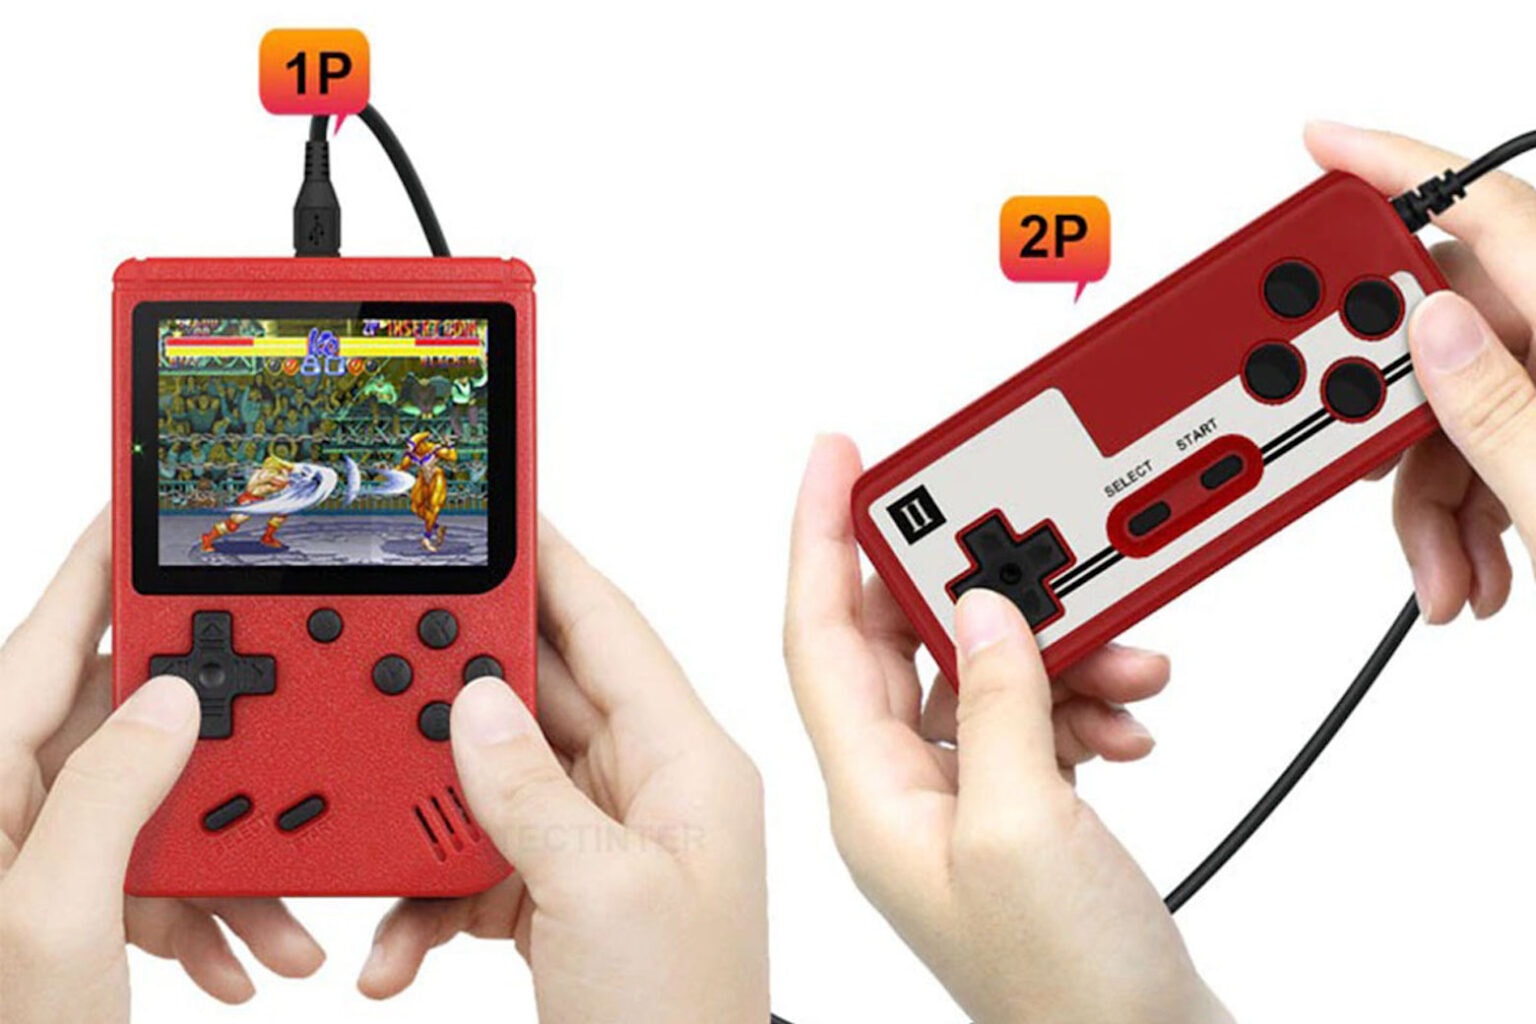 Grab this awesome handheld retro 8-bit game console.